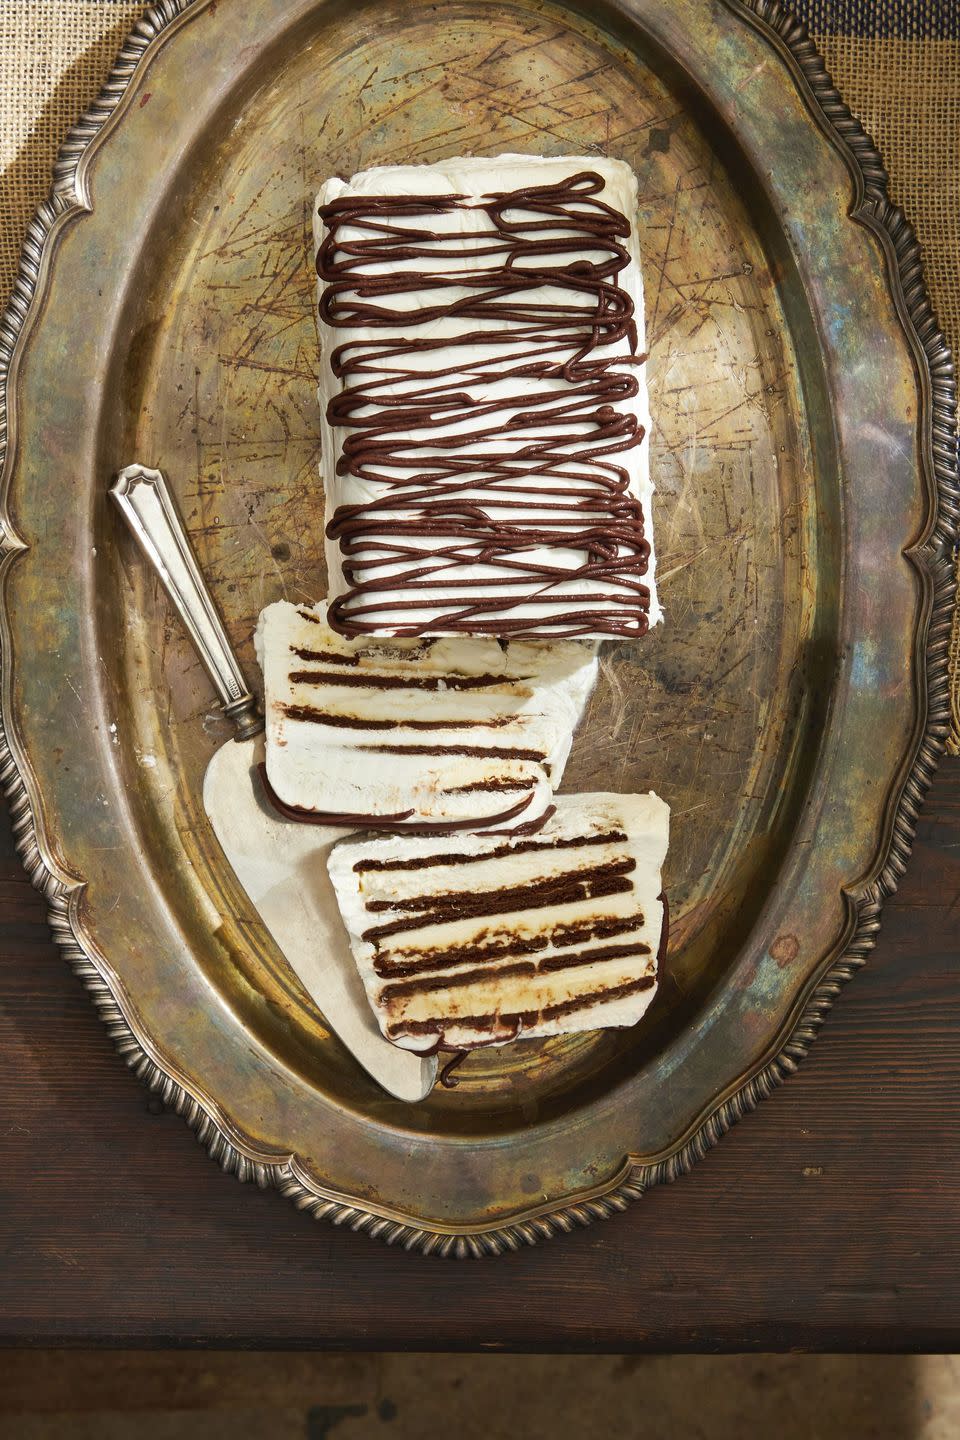 zebra semifreddo on a tarnished metal serving tray with two slices cut to show the layers inside